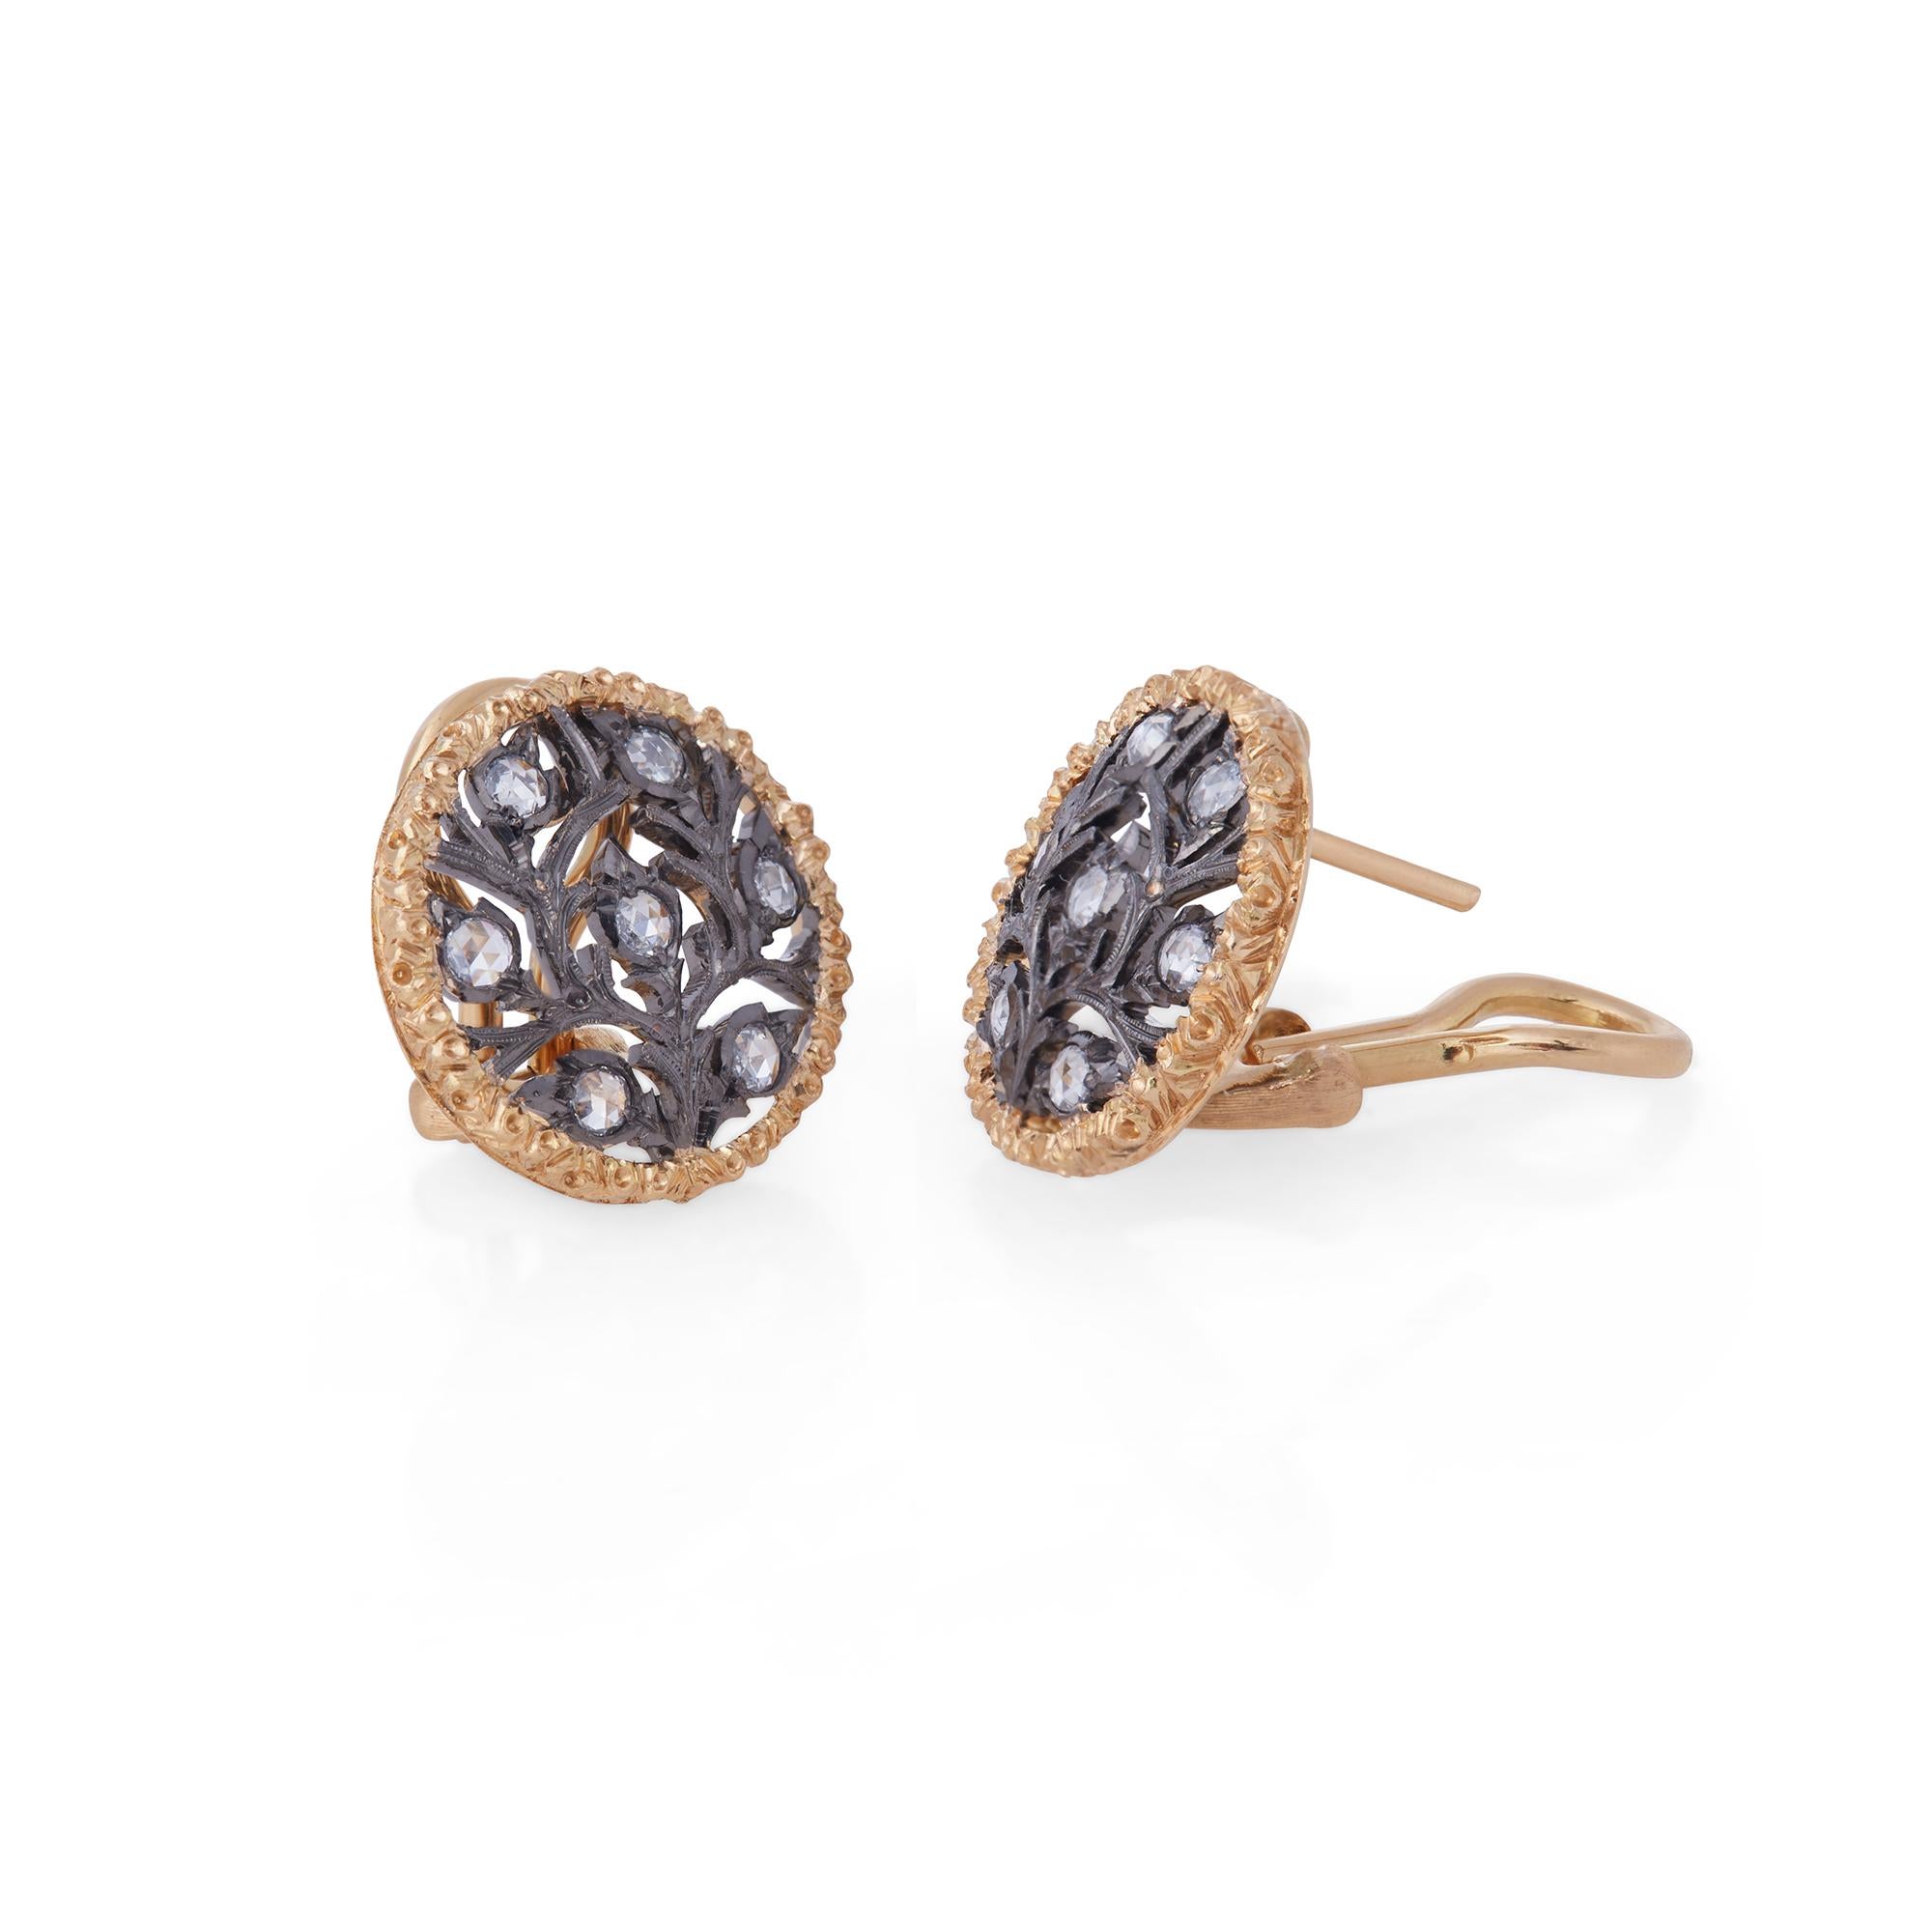 Authentic Buccellati Ramage earrings crafted in 18 karat textured yellow gold and black rhodium-plated white gold.  The foliate design is set with approximately .35 total carats of rose cut diamonds.  The earrings measure .64 inches in diameter. 